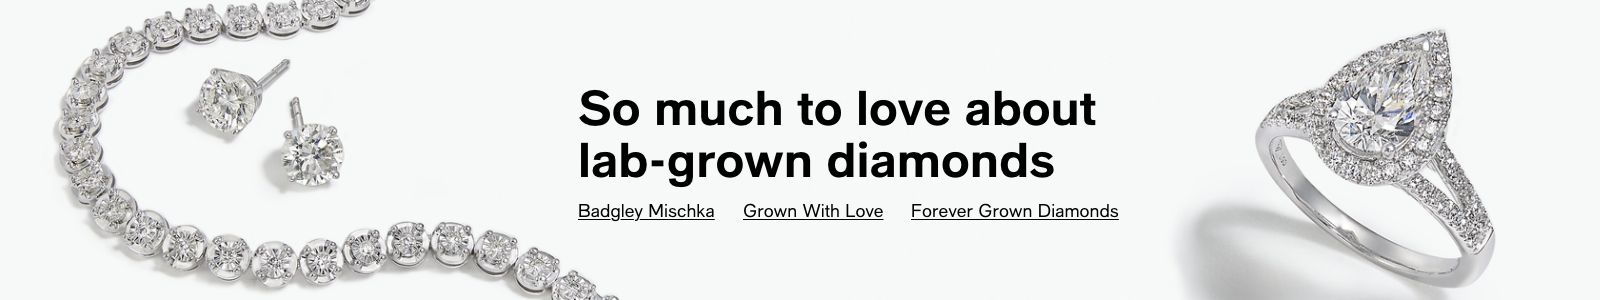 So much to love about lab-grown diamonds, Badgley Mischka, Grown With Love, Forever Grown Diamonds